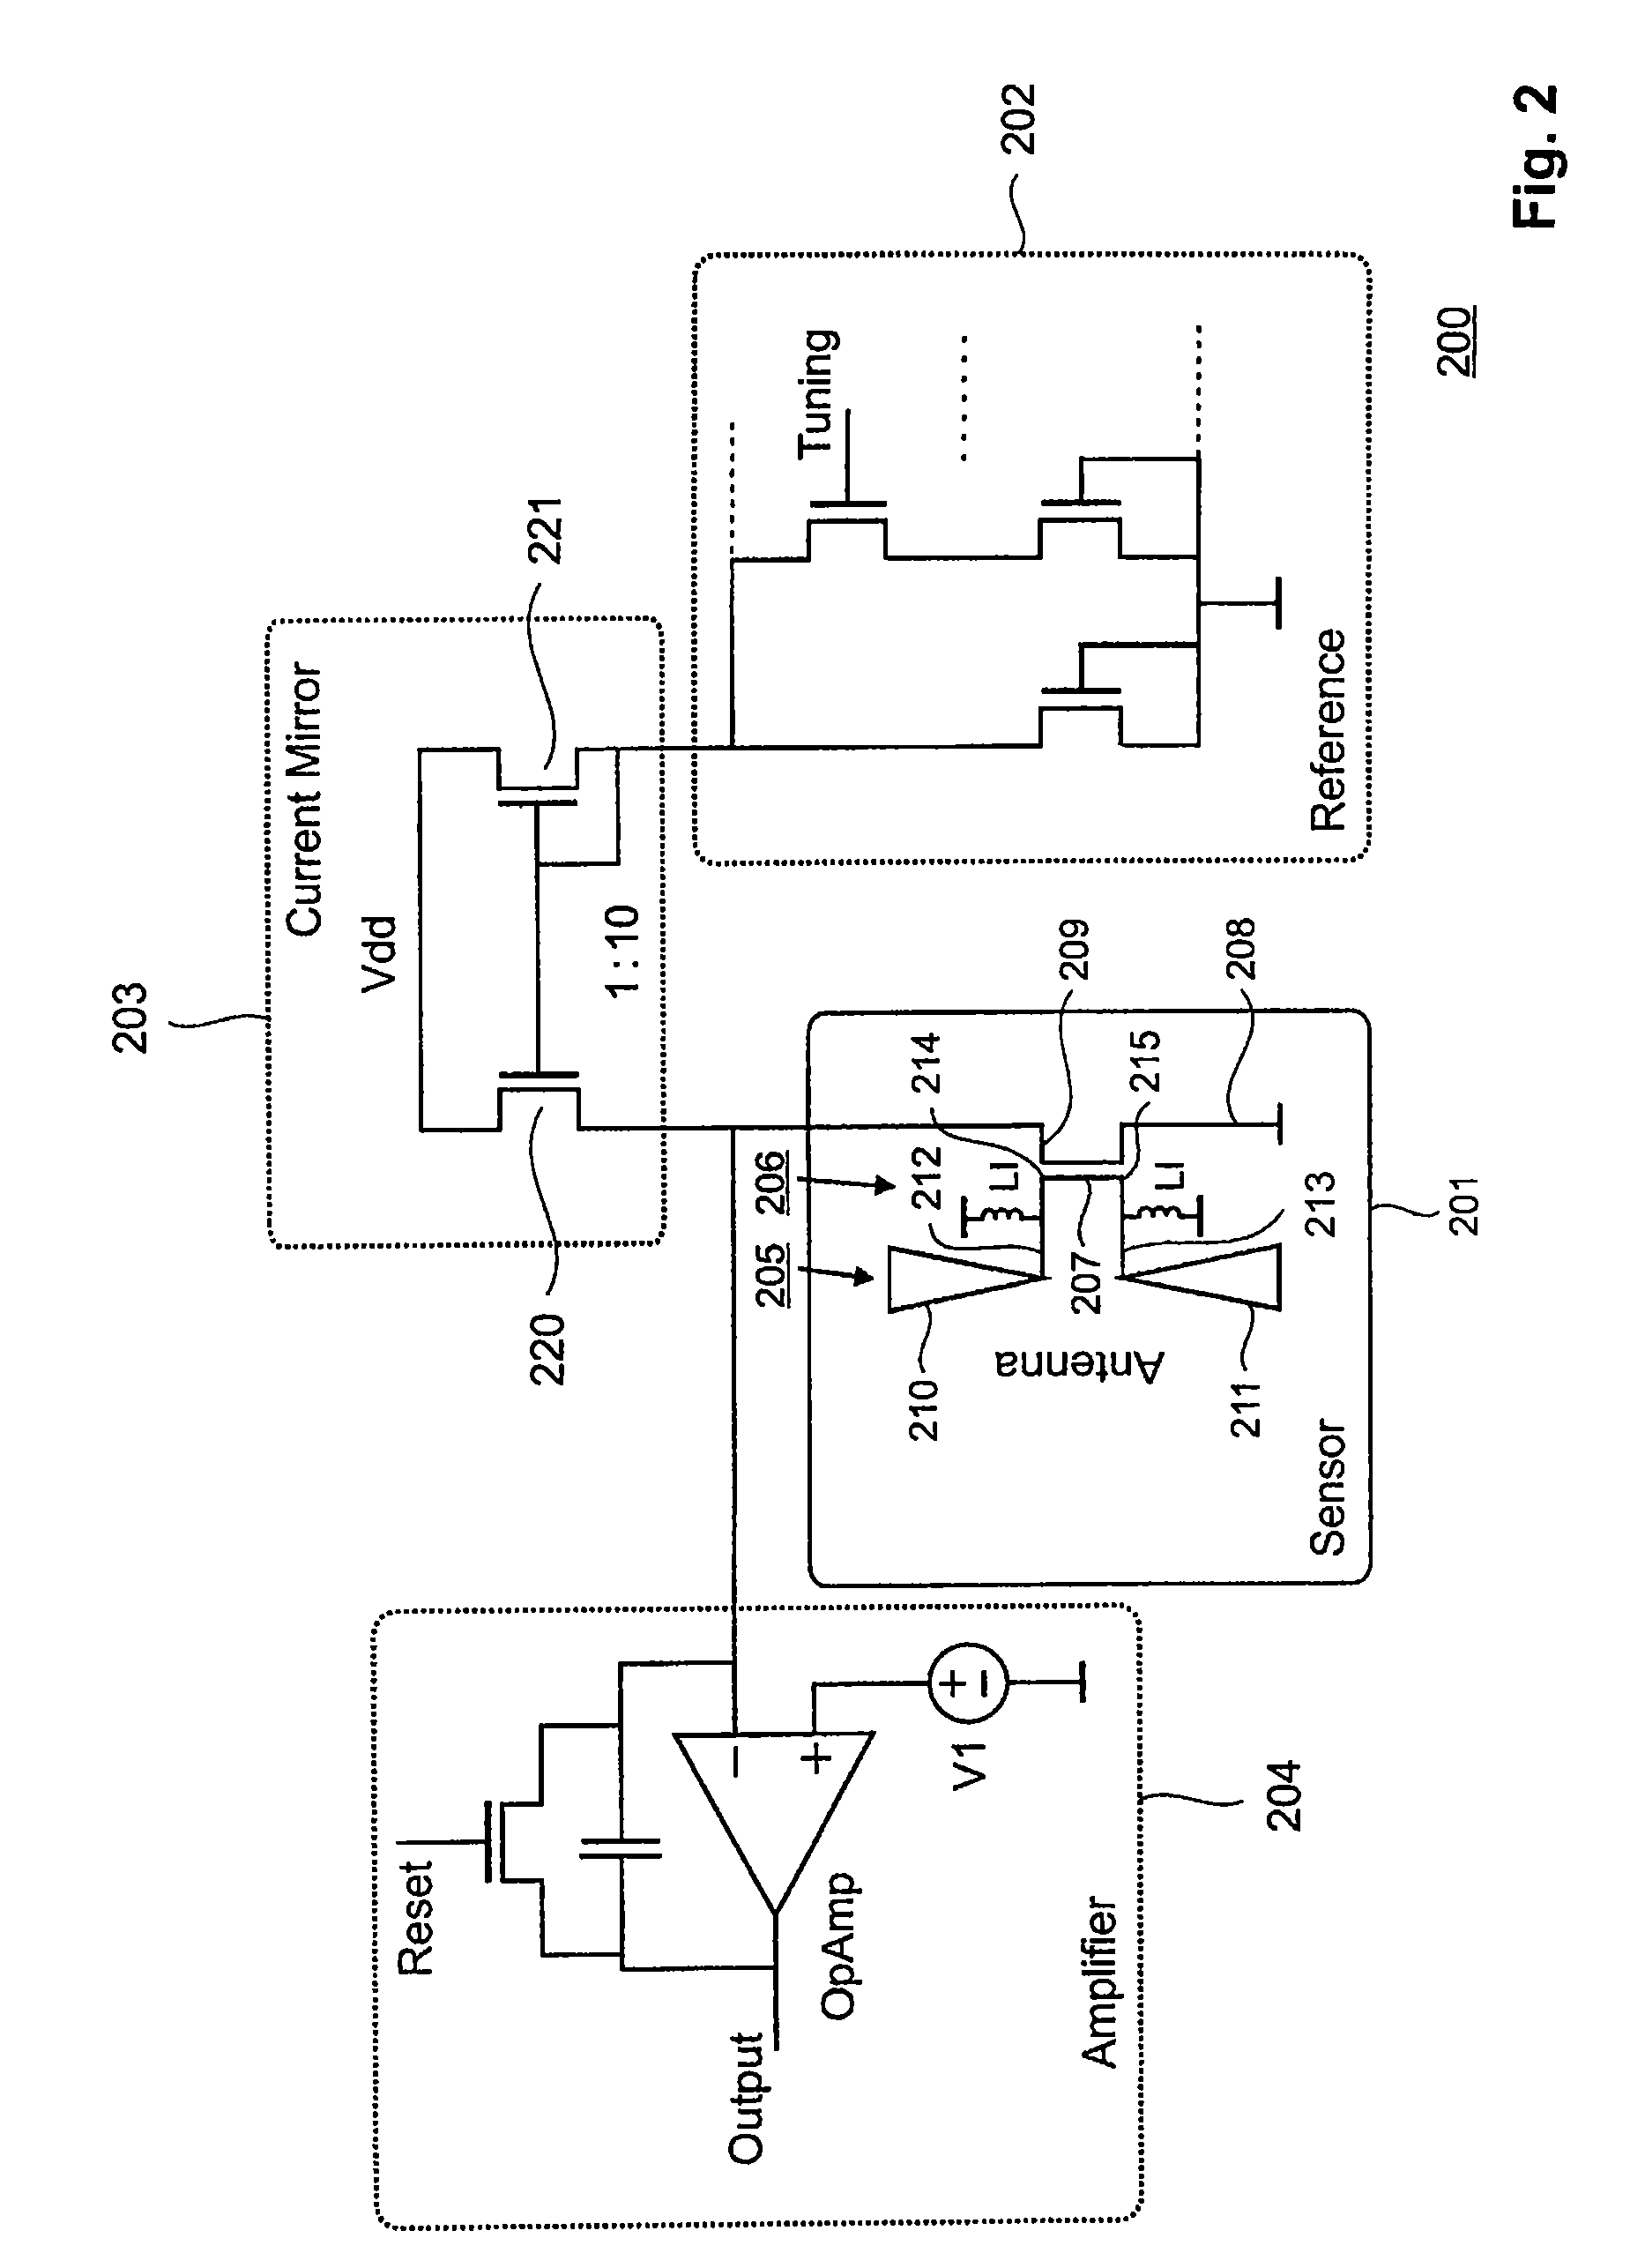 Wide-band antenna coupled spectrometer using CMOS transistor